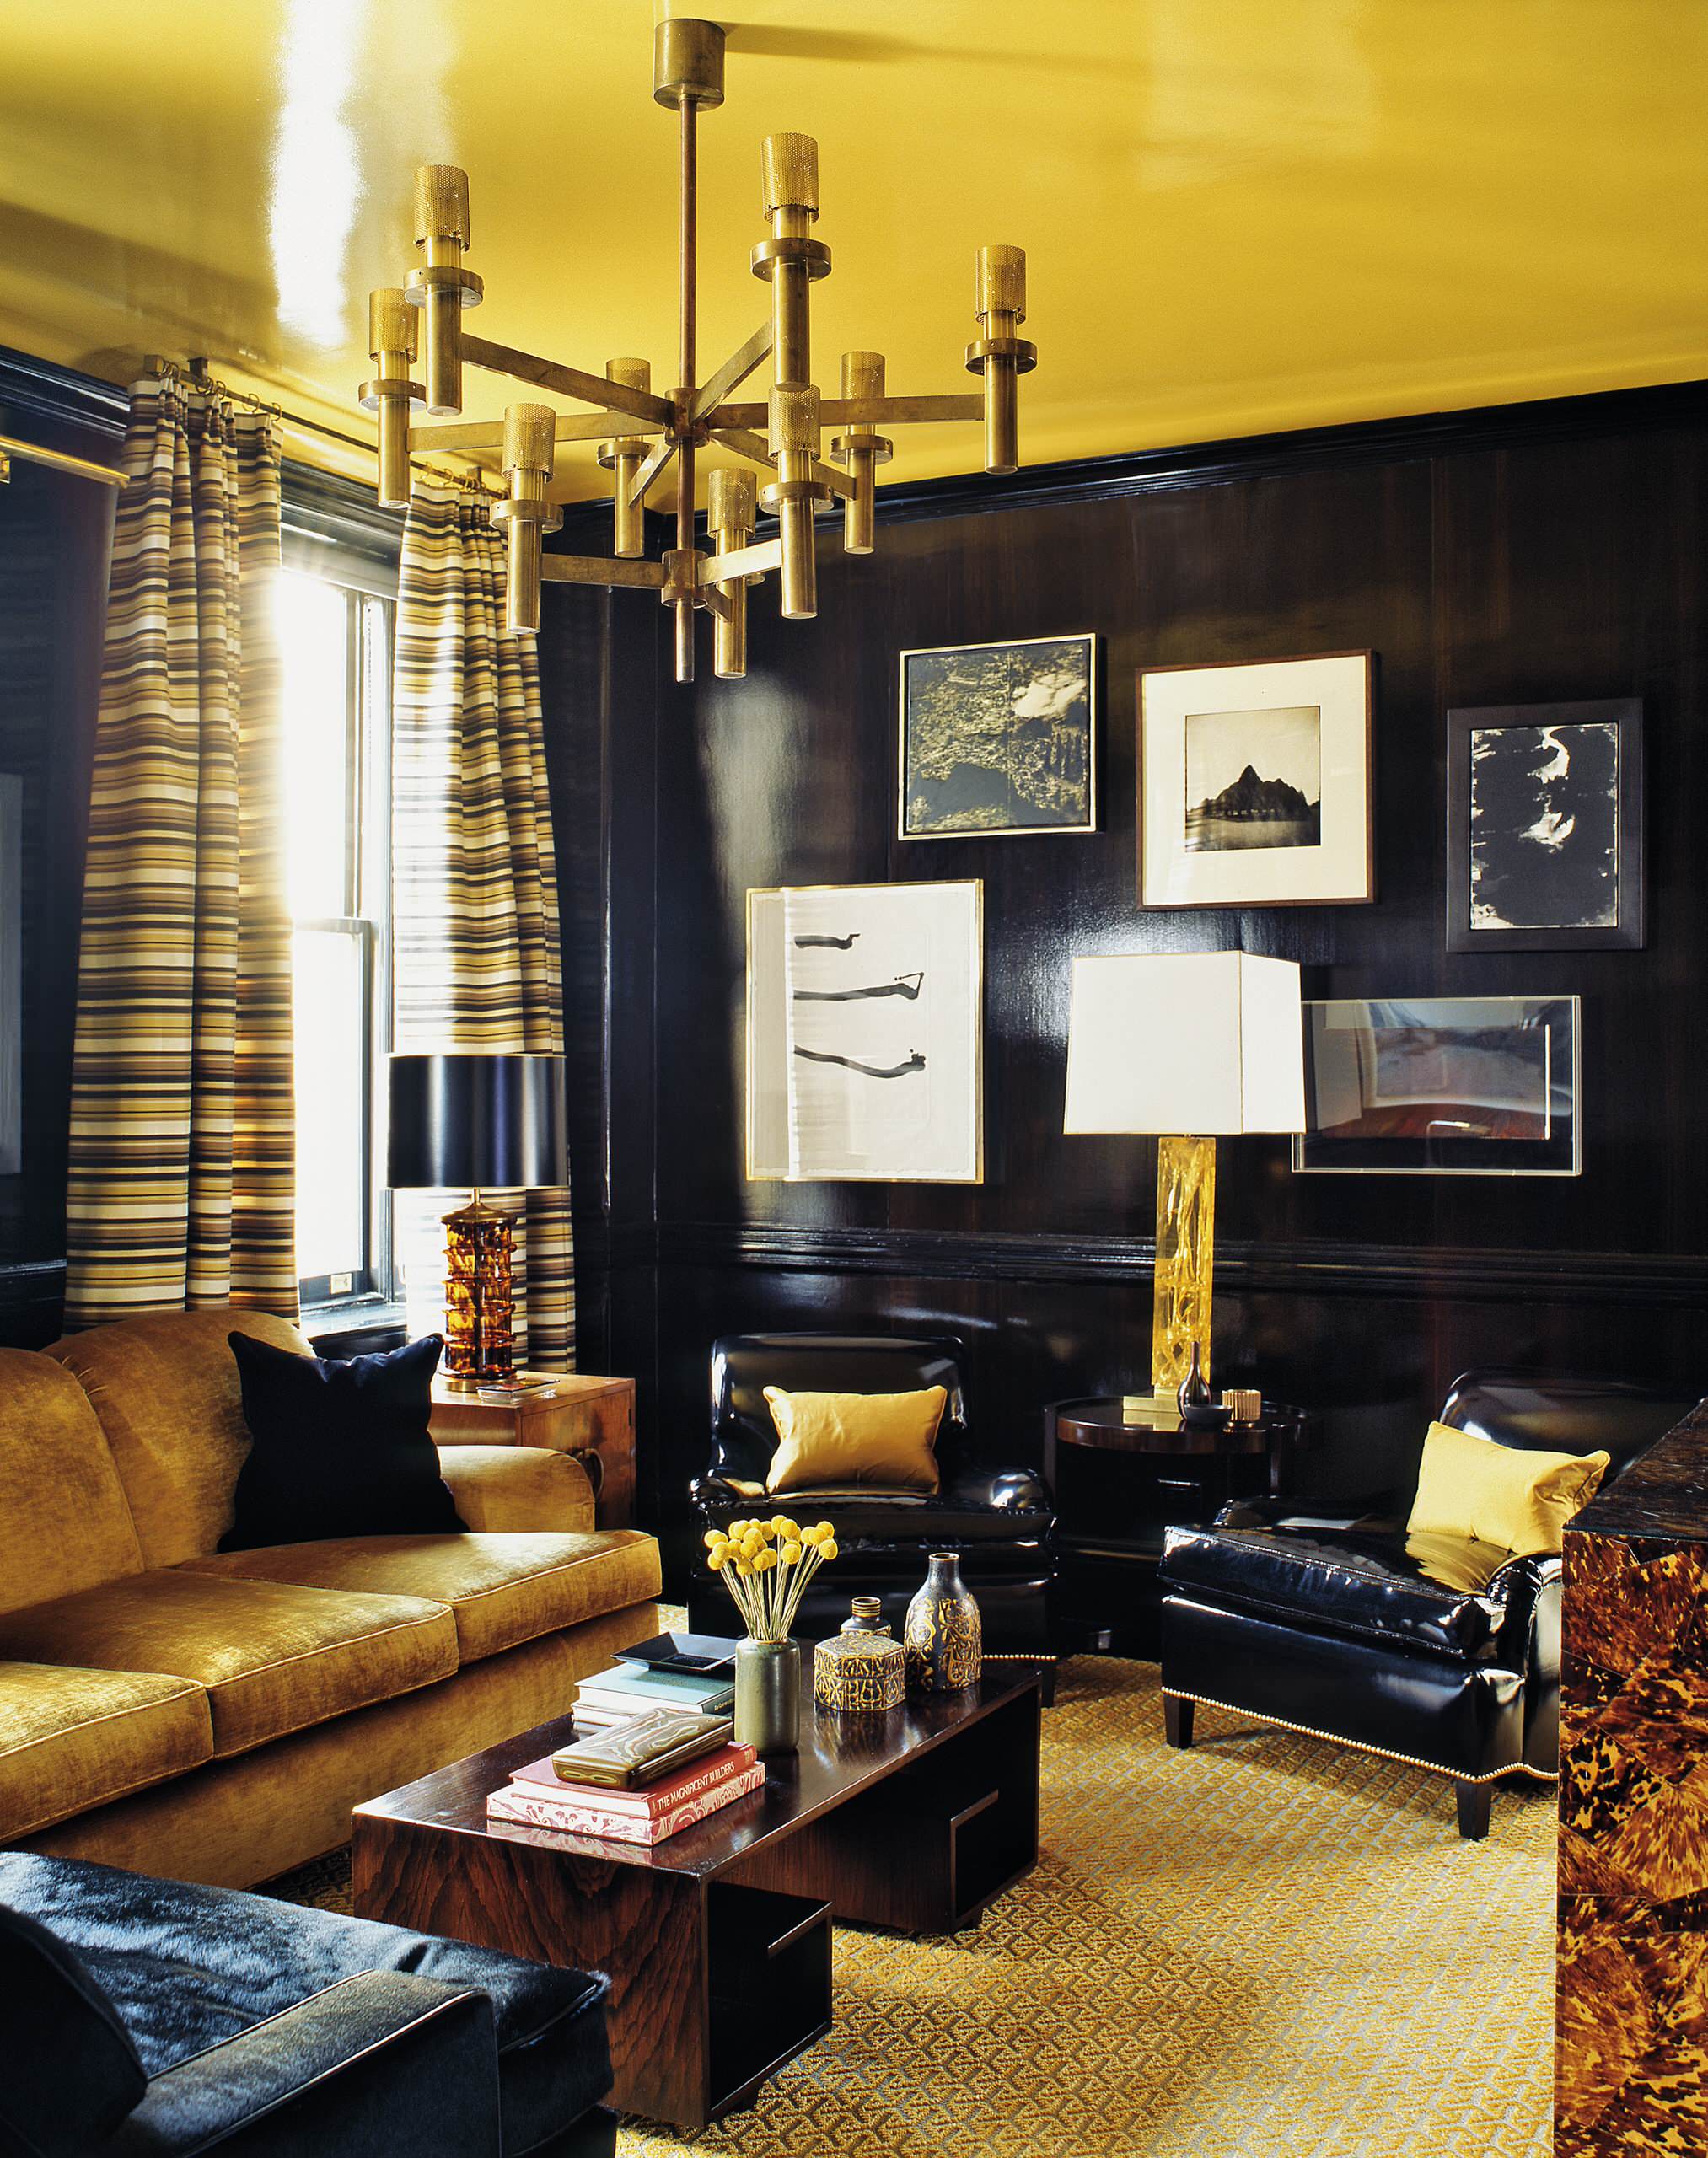 Black And Gold Room Ideas / Black And Gold Bedrooms Decor Leadersrooms